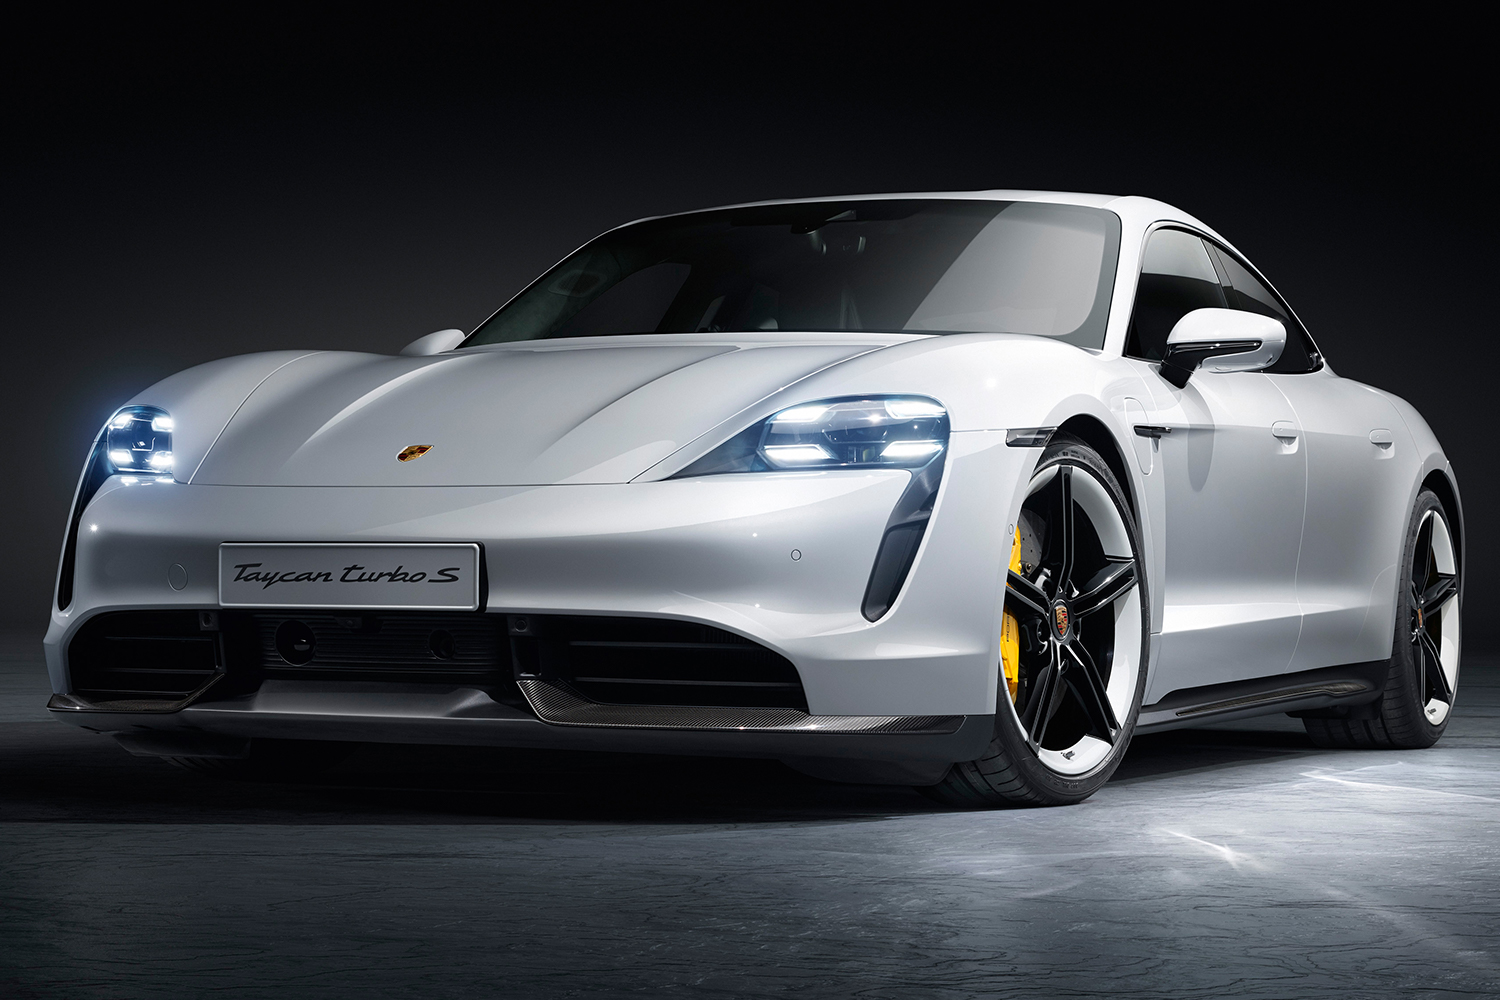 Electric Porsche Taycan Turbo and Turbo S